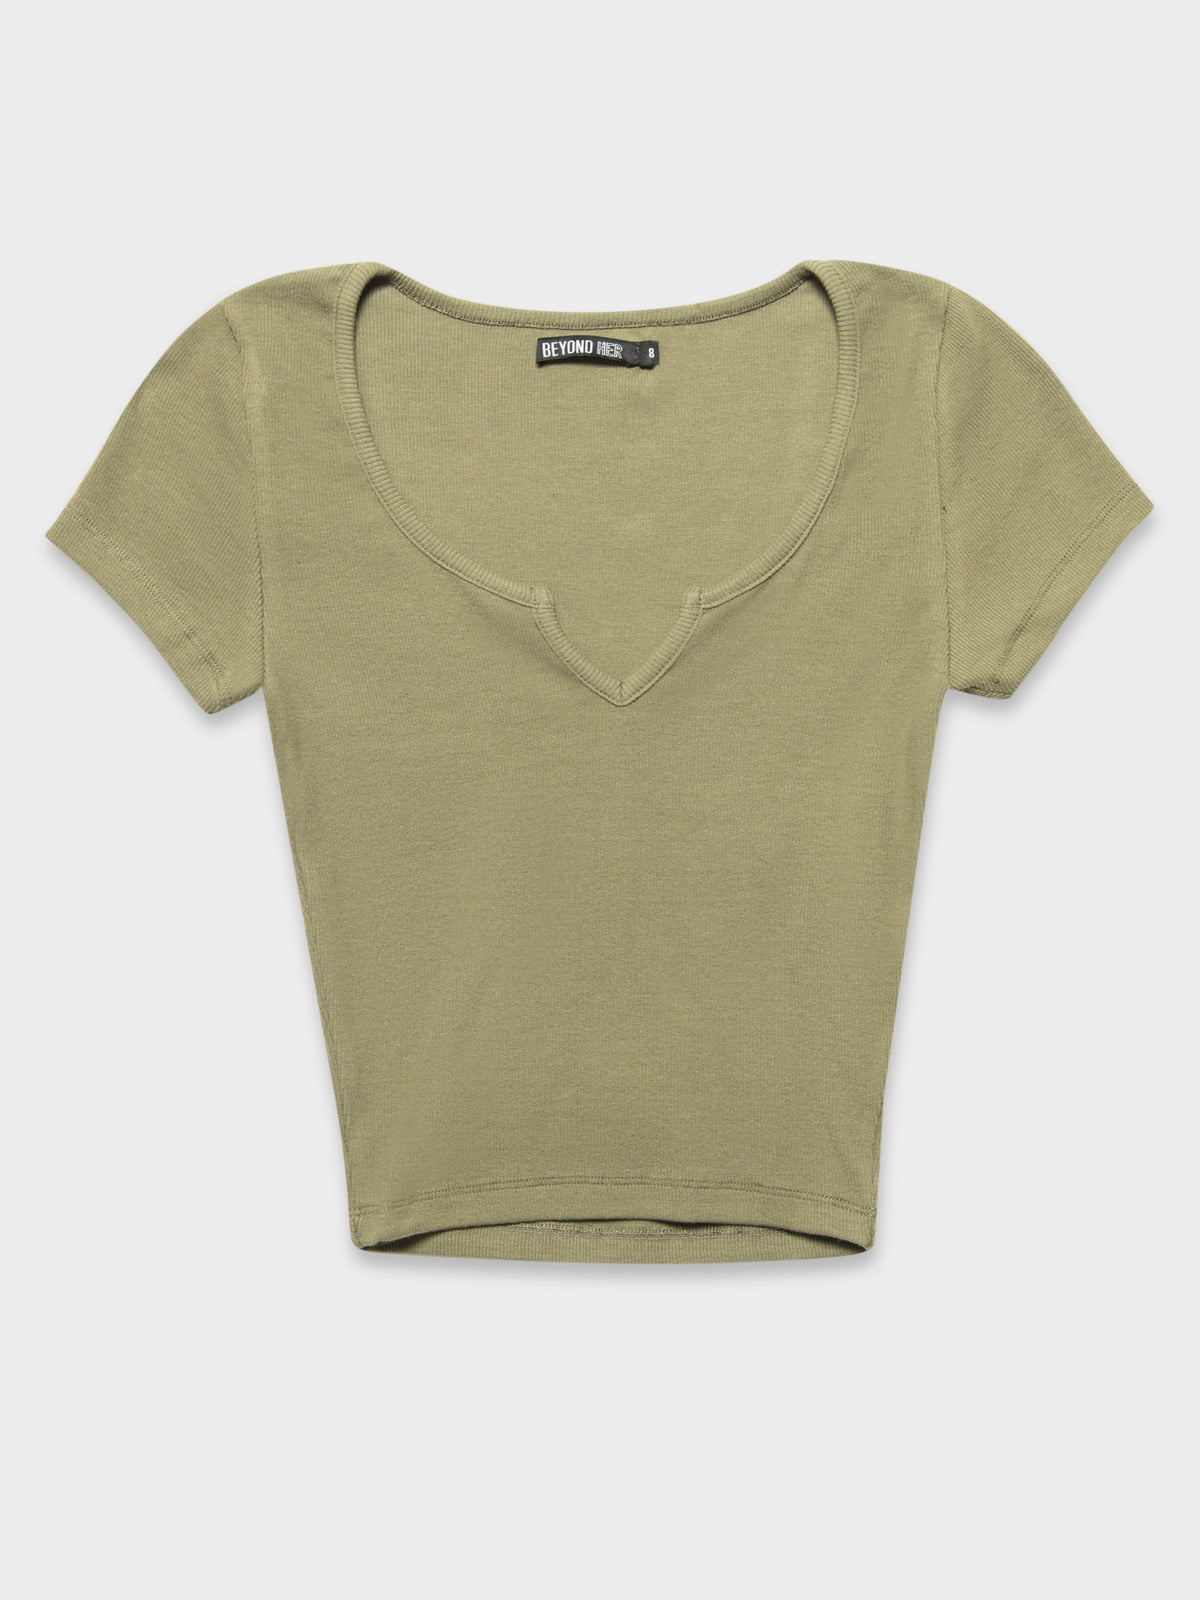 Bowie Cut Out T-Shirt in Olive